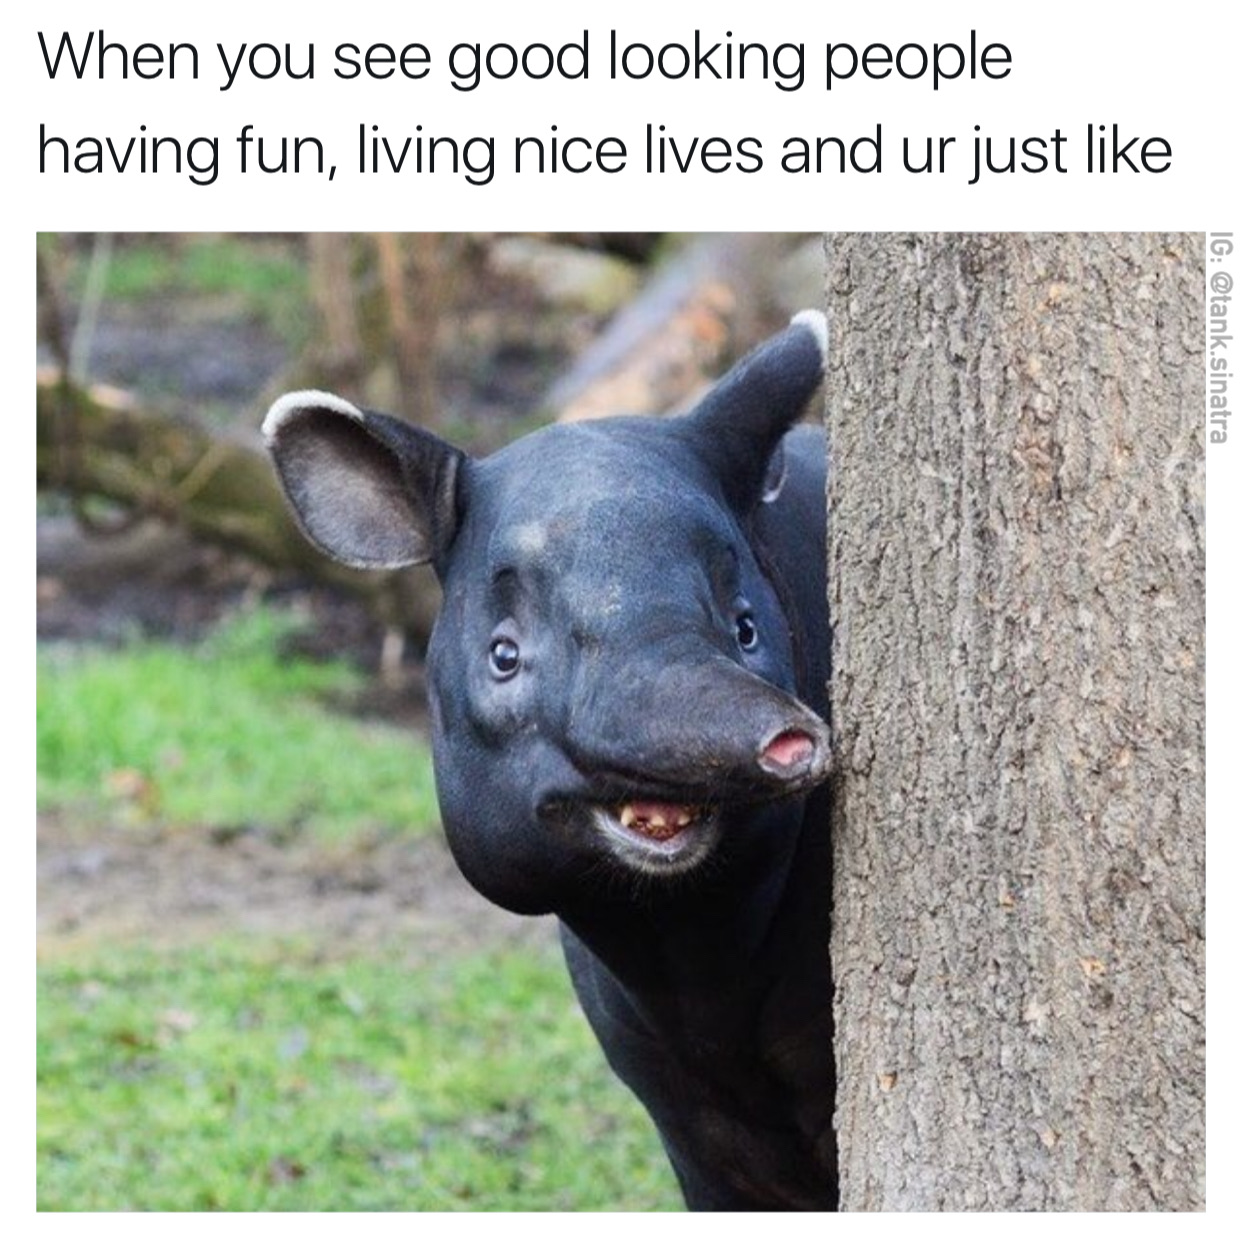 curious tapir - When you see good looking people having fun, living nice lives and ur just Ig .sinatra